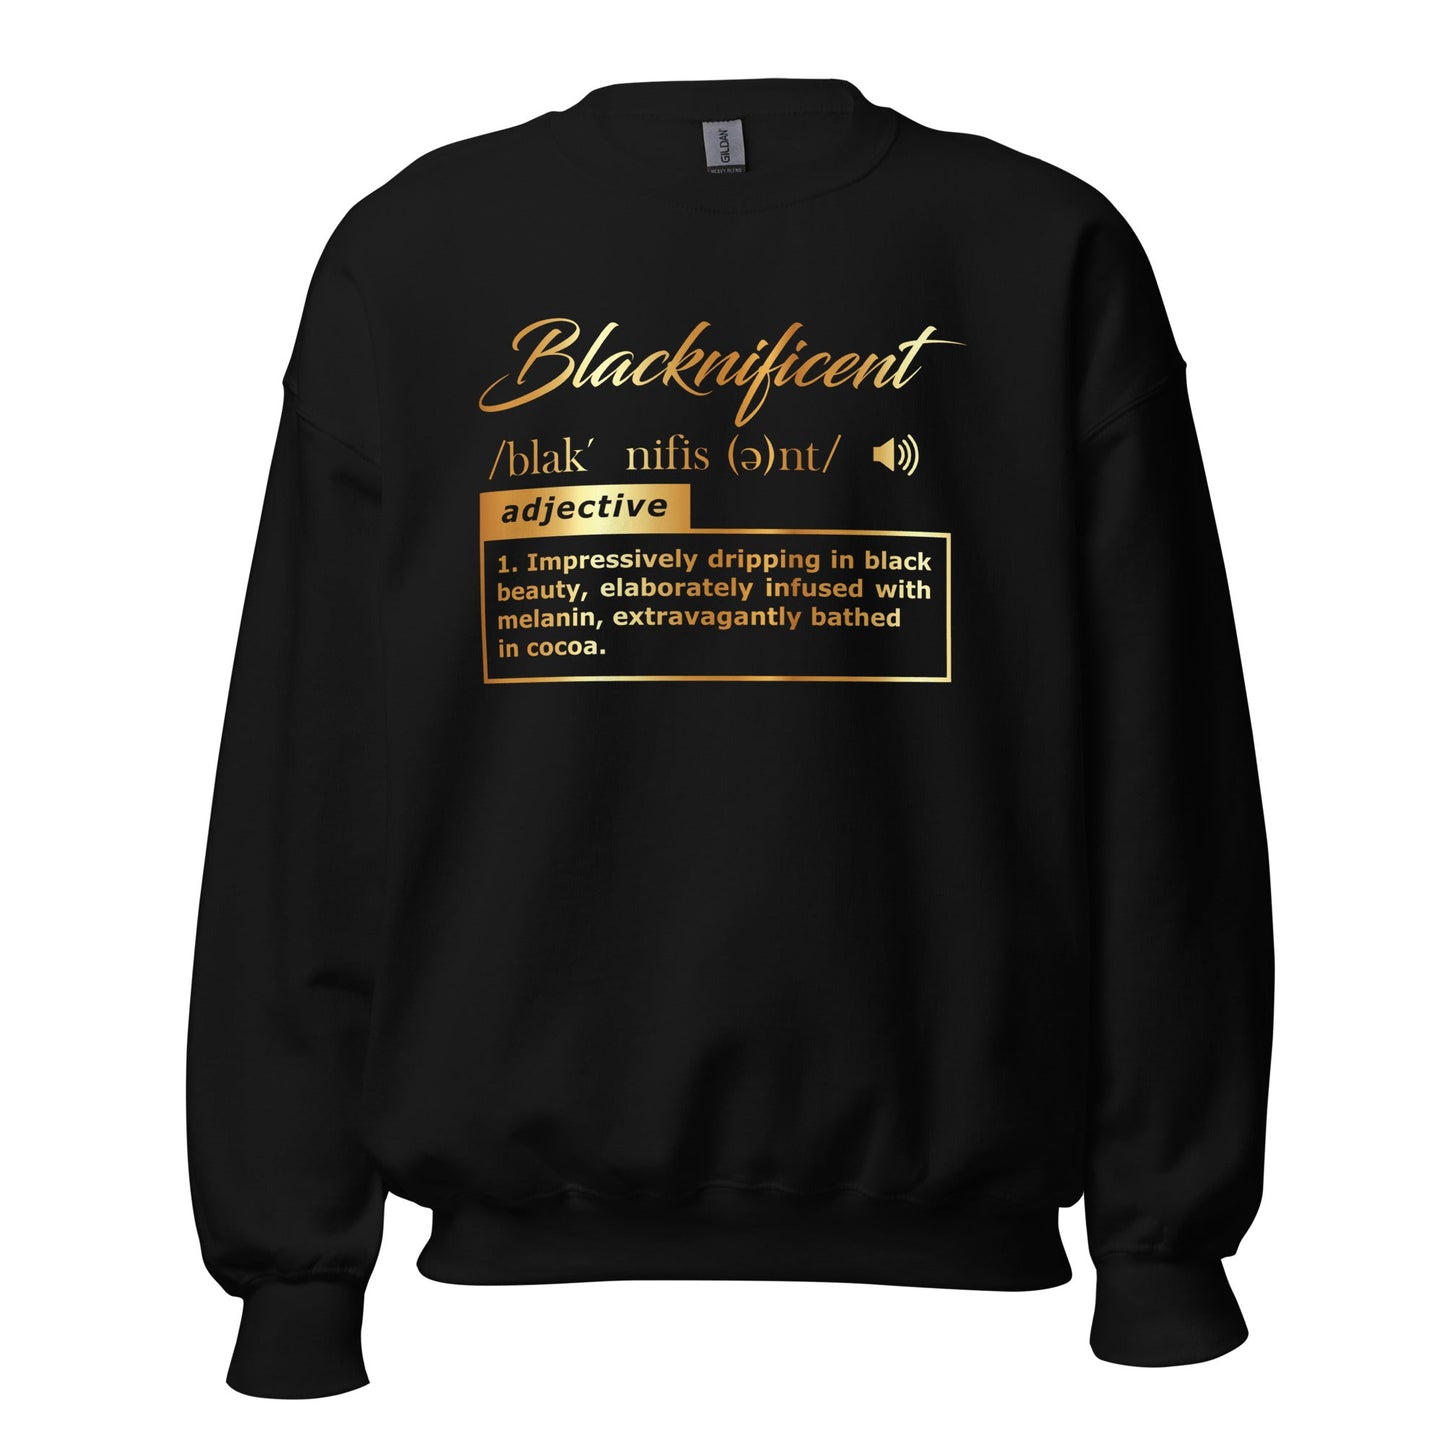 Blacknificent Short-Sleeve Unisex Sweater (For a Slim Fit Order a Size Down) - Catch This Tea Shirts